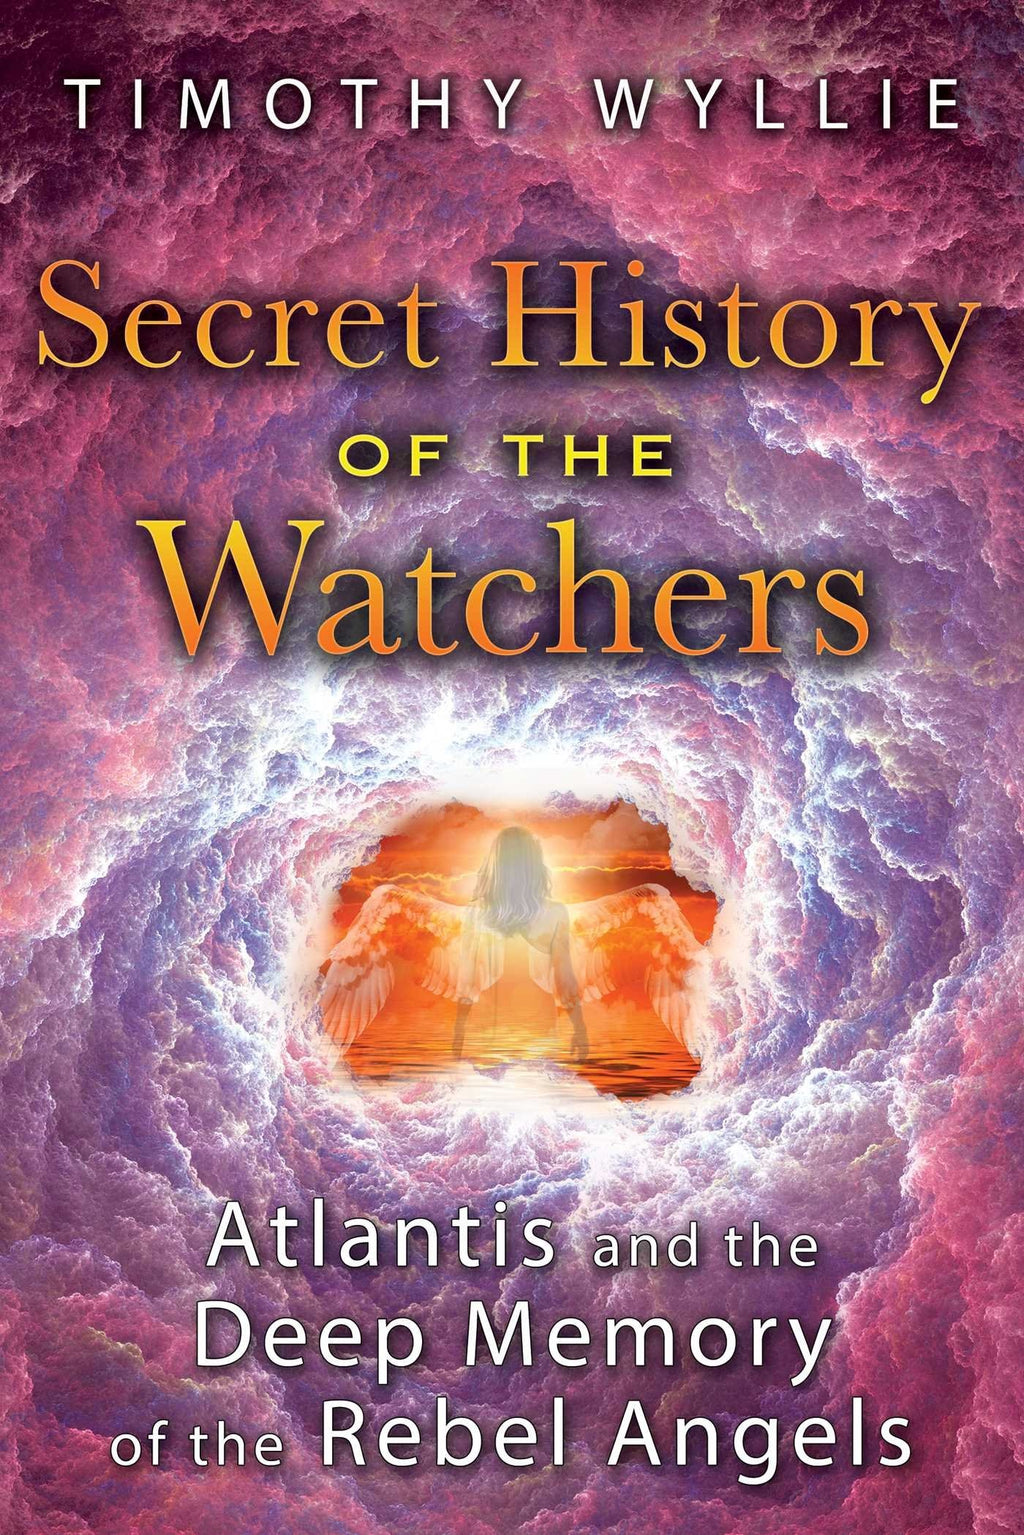 Secret history of the watchers - Atlantis and the deep memory of the rebel angels: 1591433193